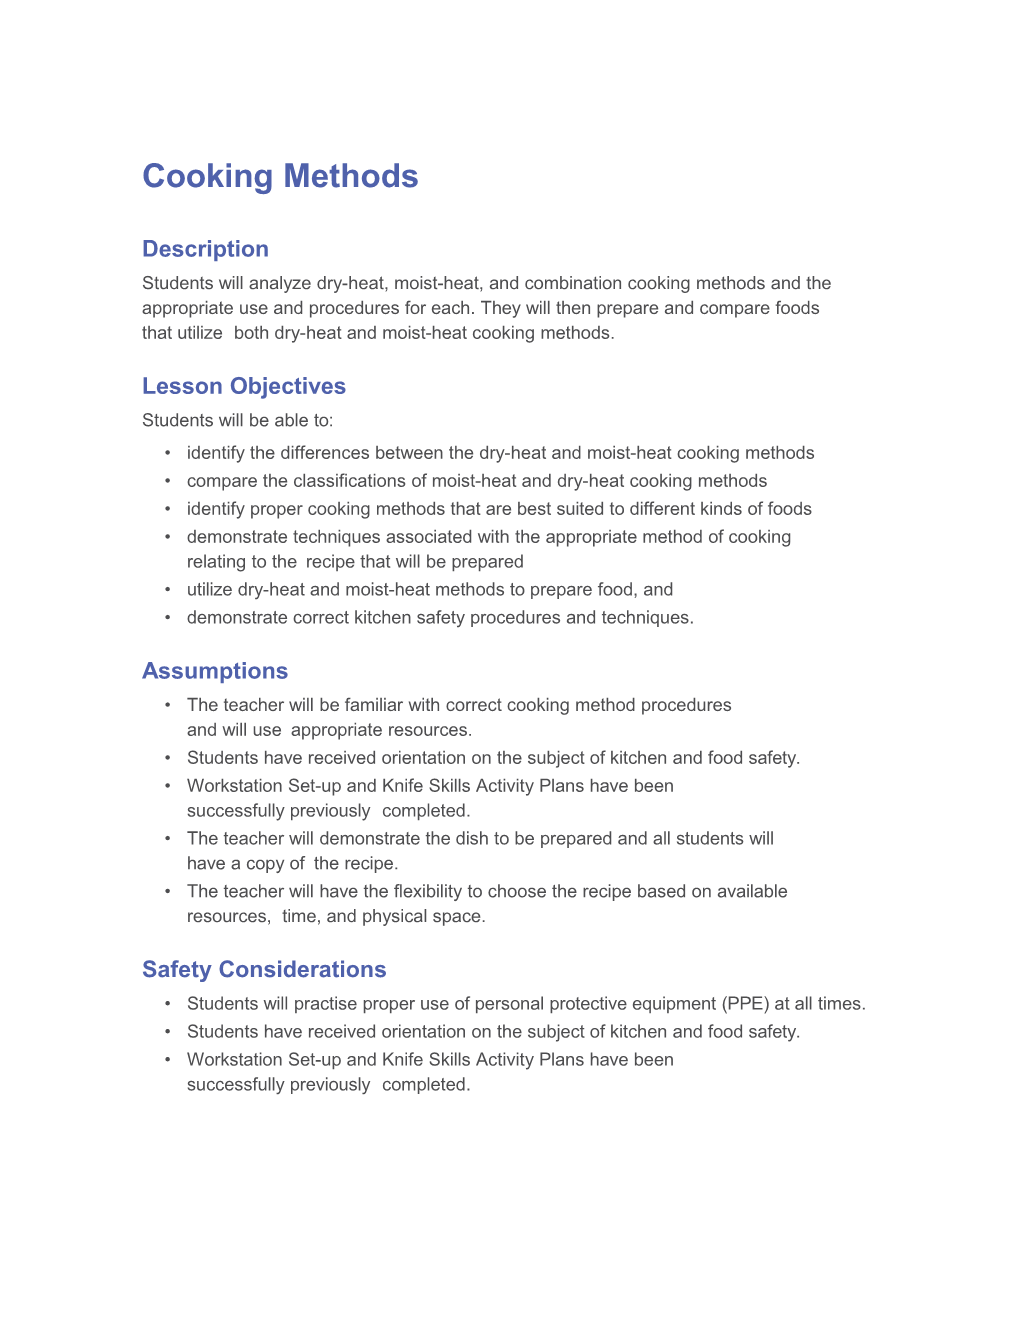 Identify Thedifferences Between Thedry-Heat Andmoist-Heat Cookingmethods